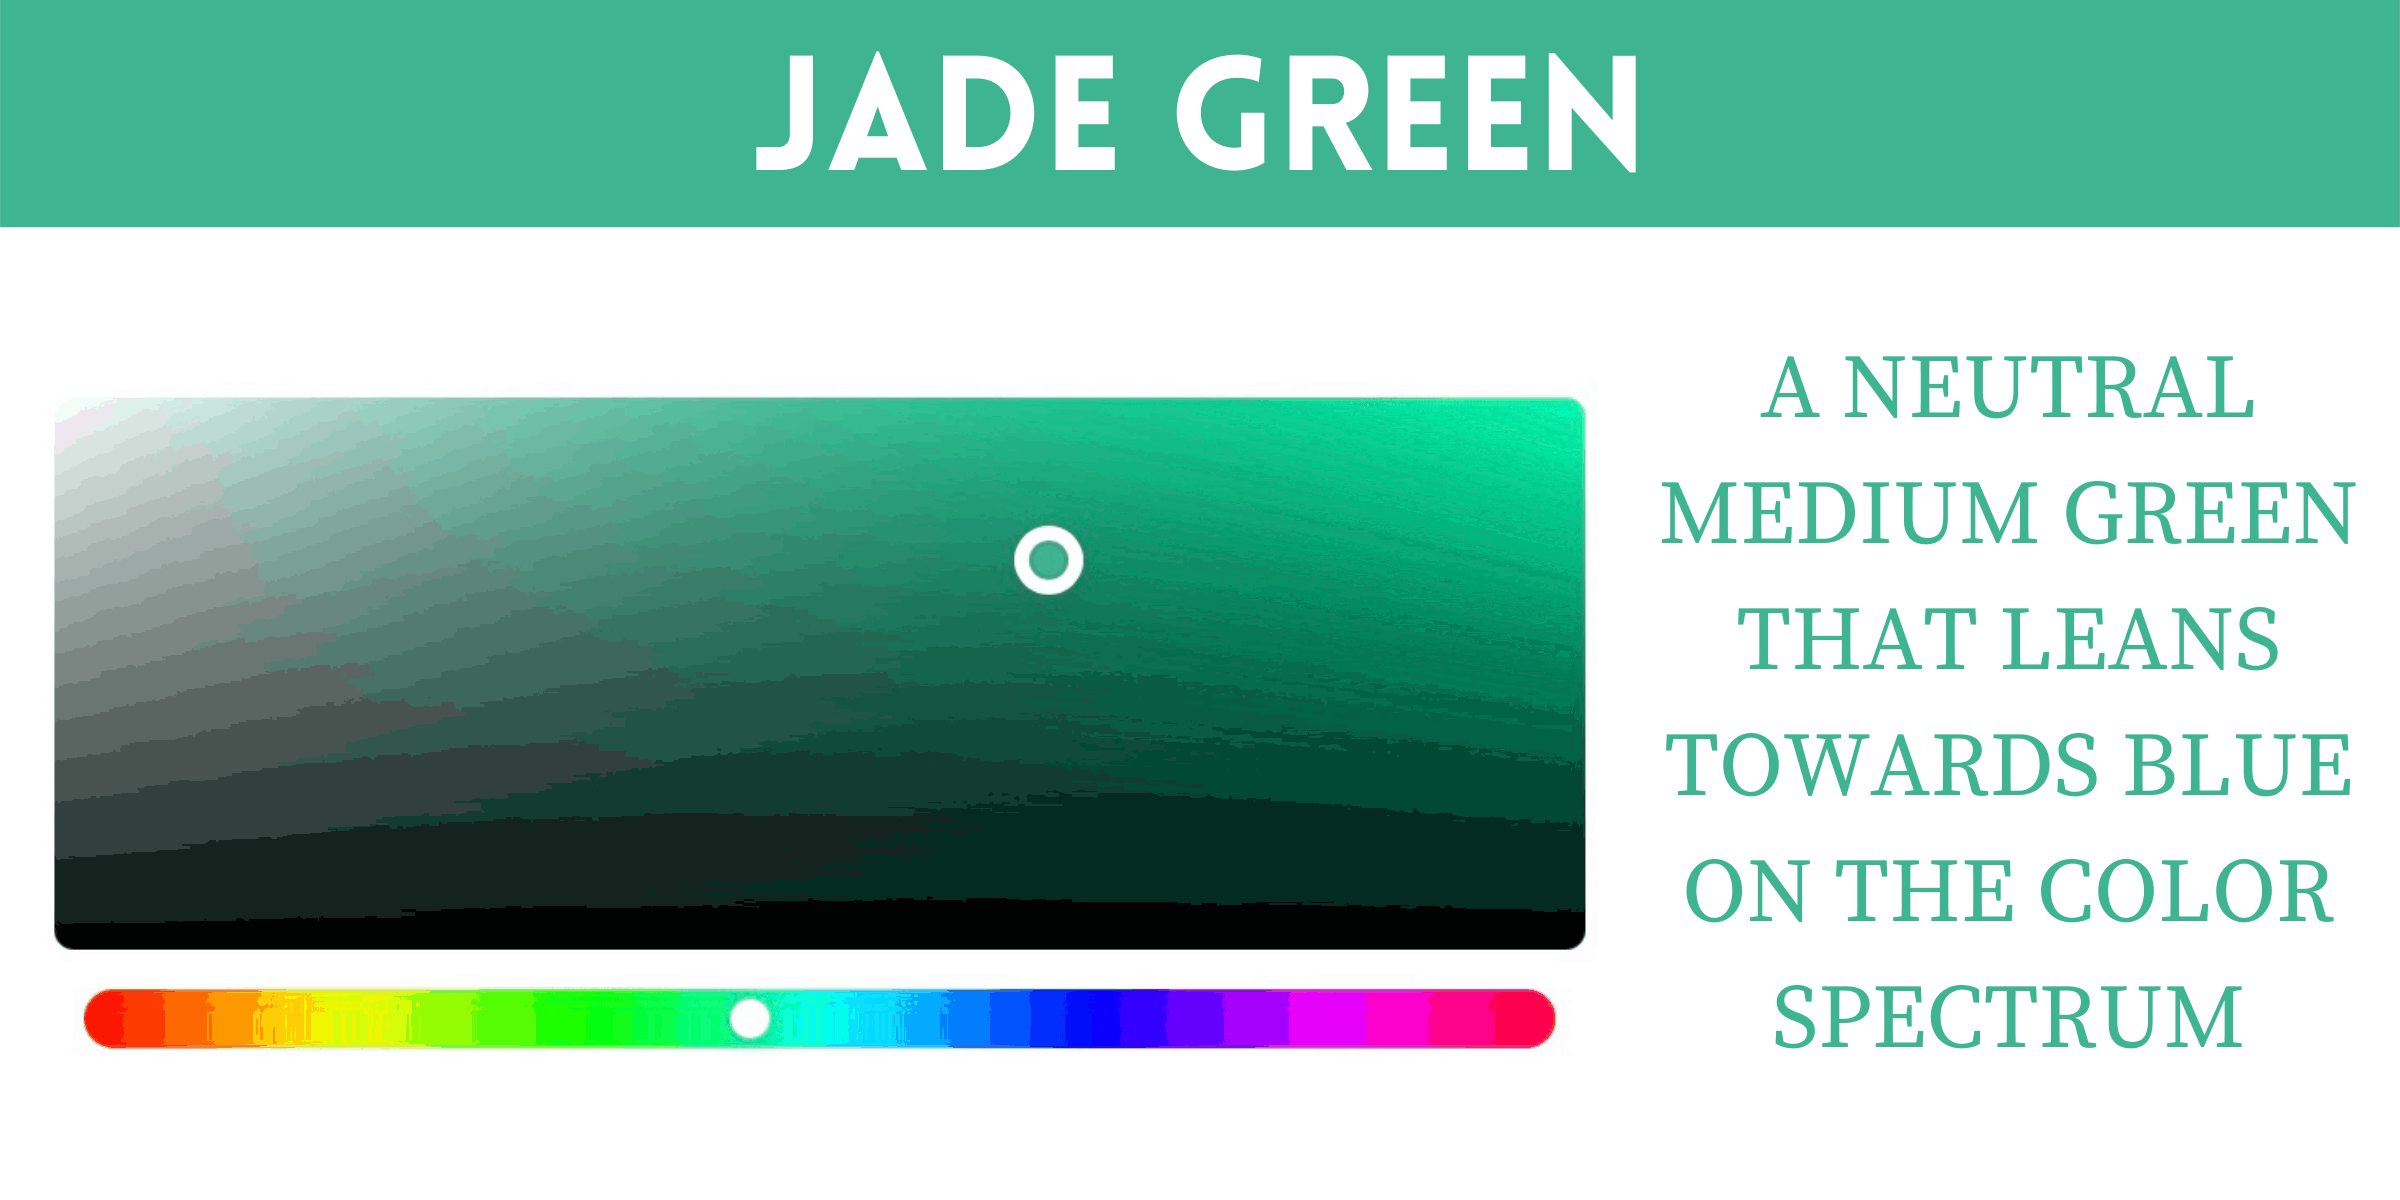 Jade Green is a Universally Flattering Color